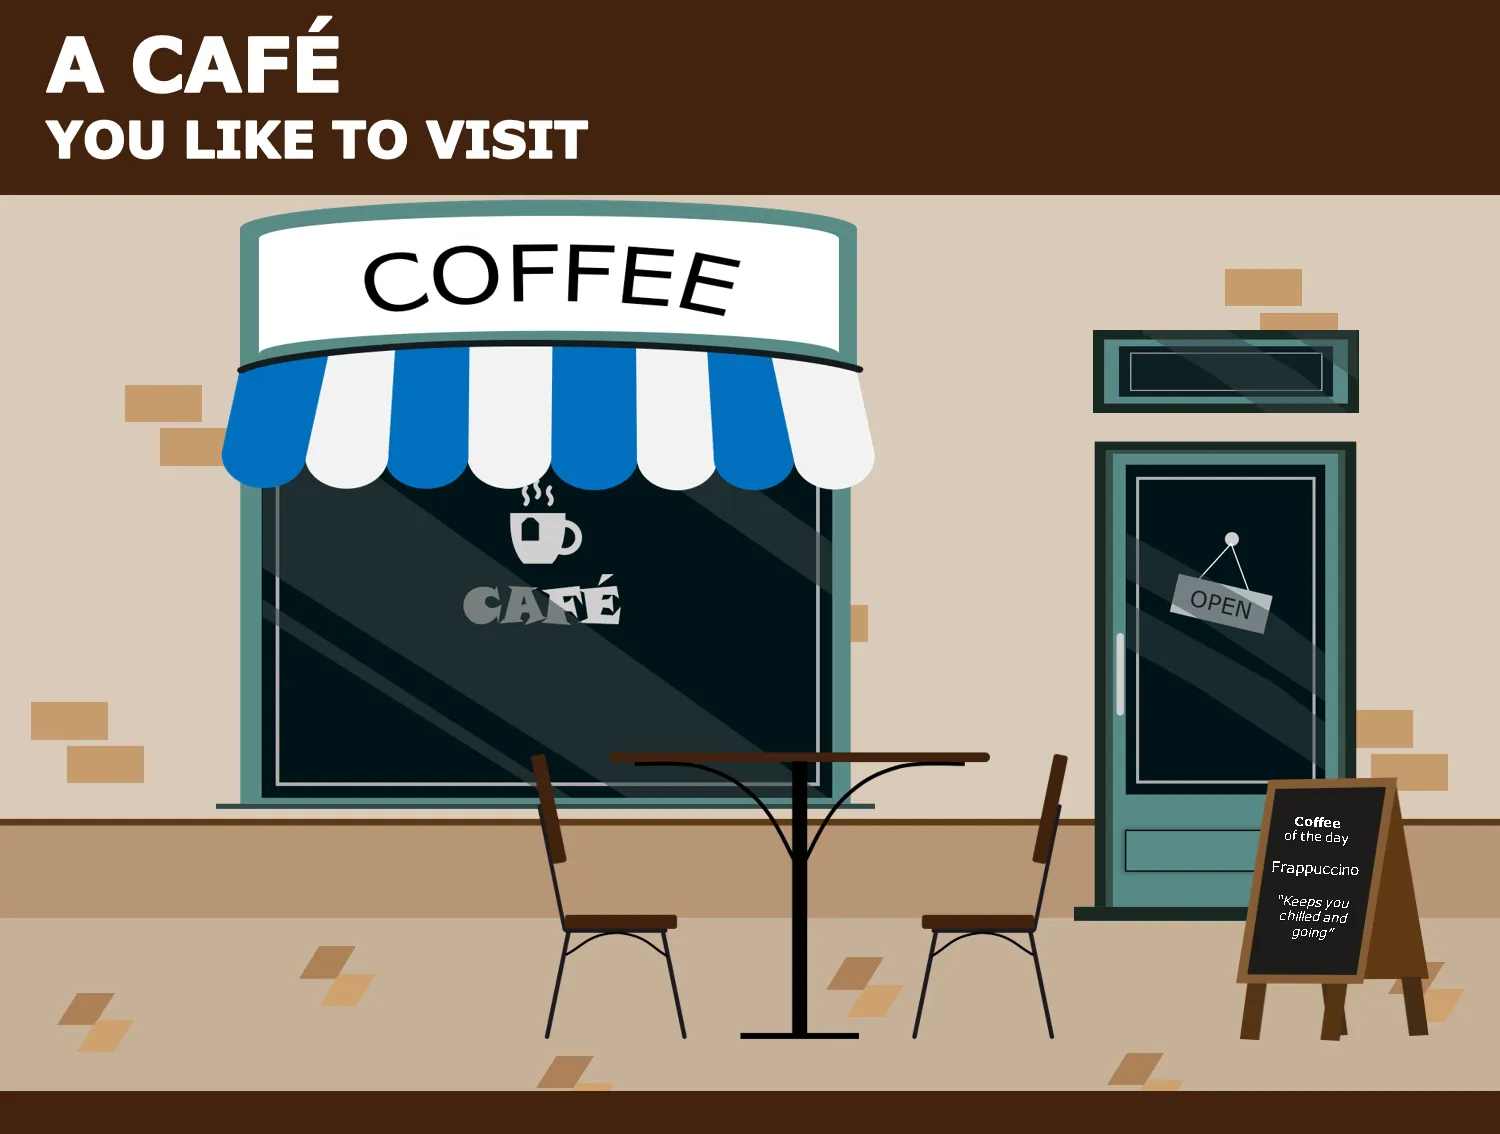 IELTS TOPIC: A Café You Like To Visit